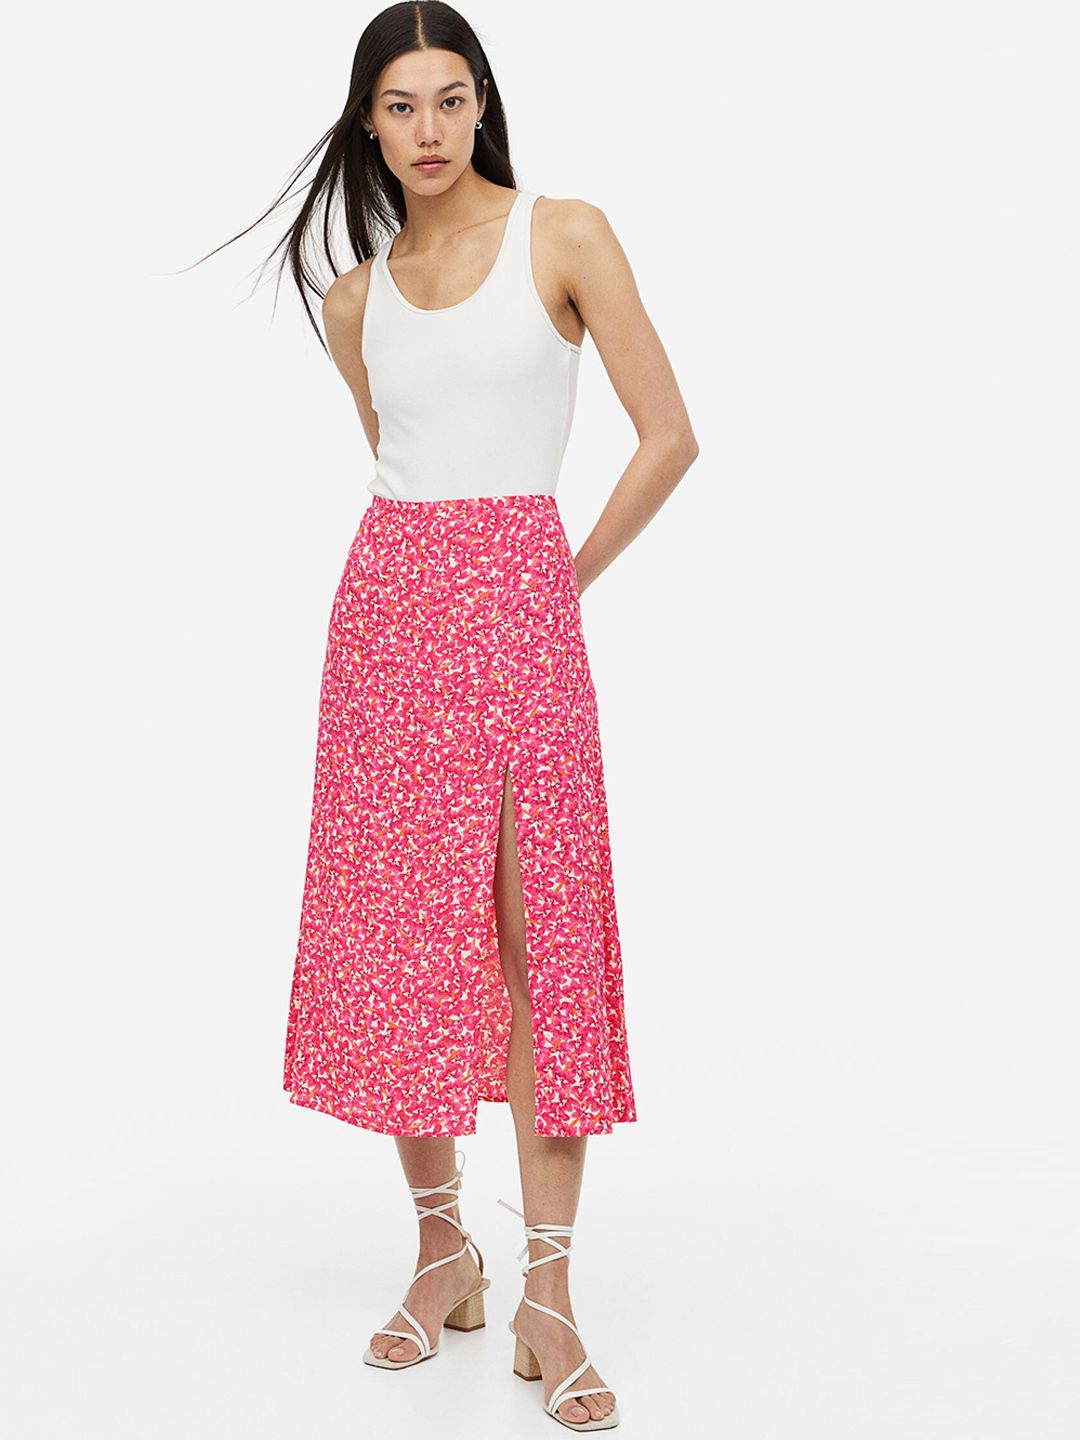 H&M Women Floral-Printed Crepe A-Line Skirt Price in India